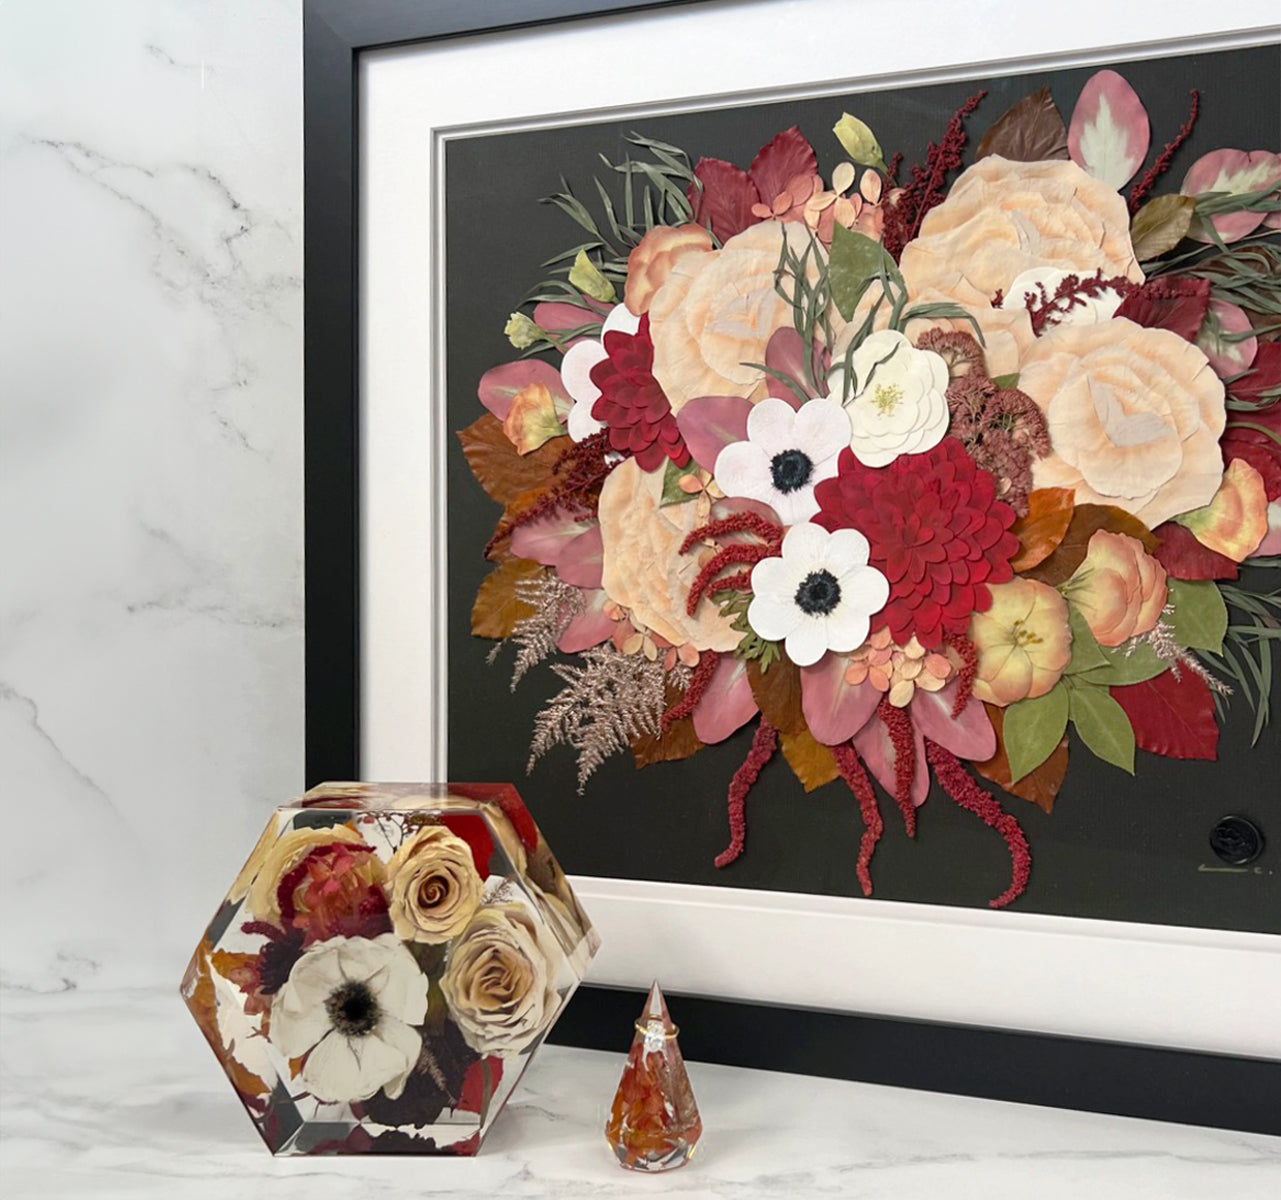 Bridal Bouquet Preserved in Resin Floral Block and Pressed & Framed Display - DBAndrea